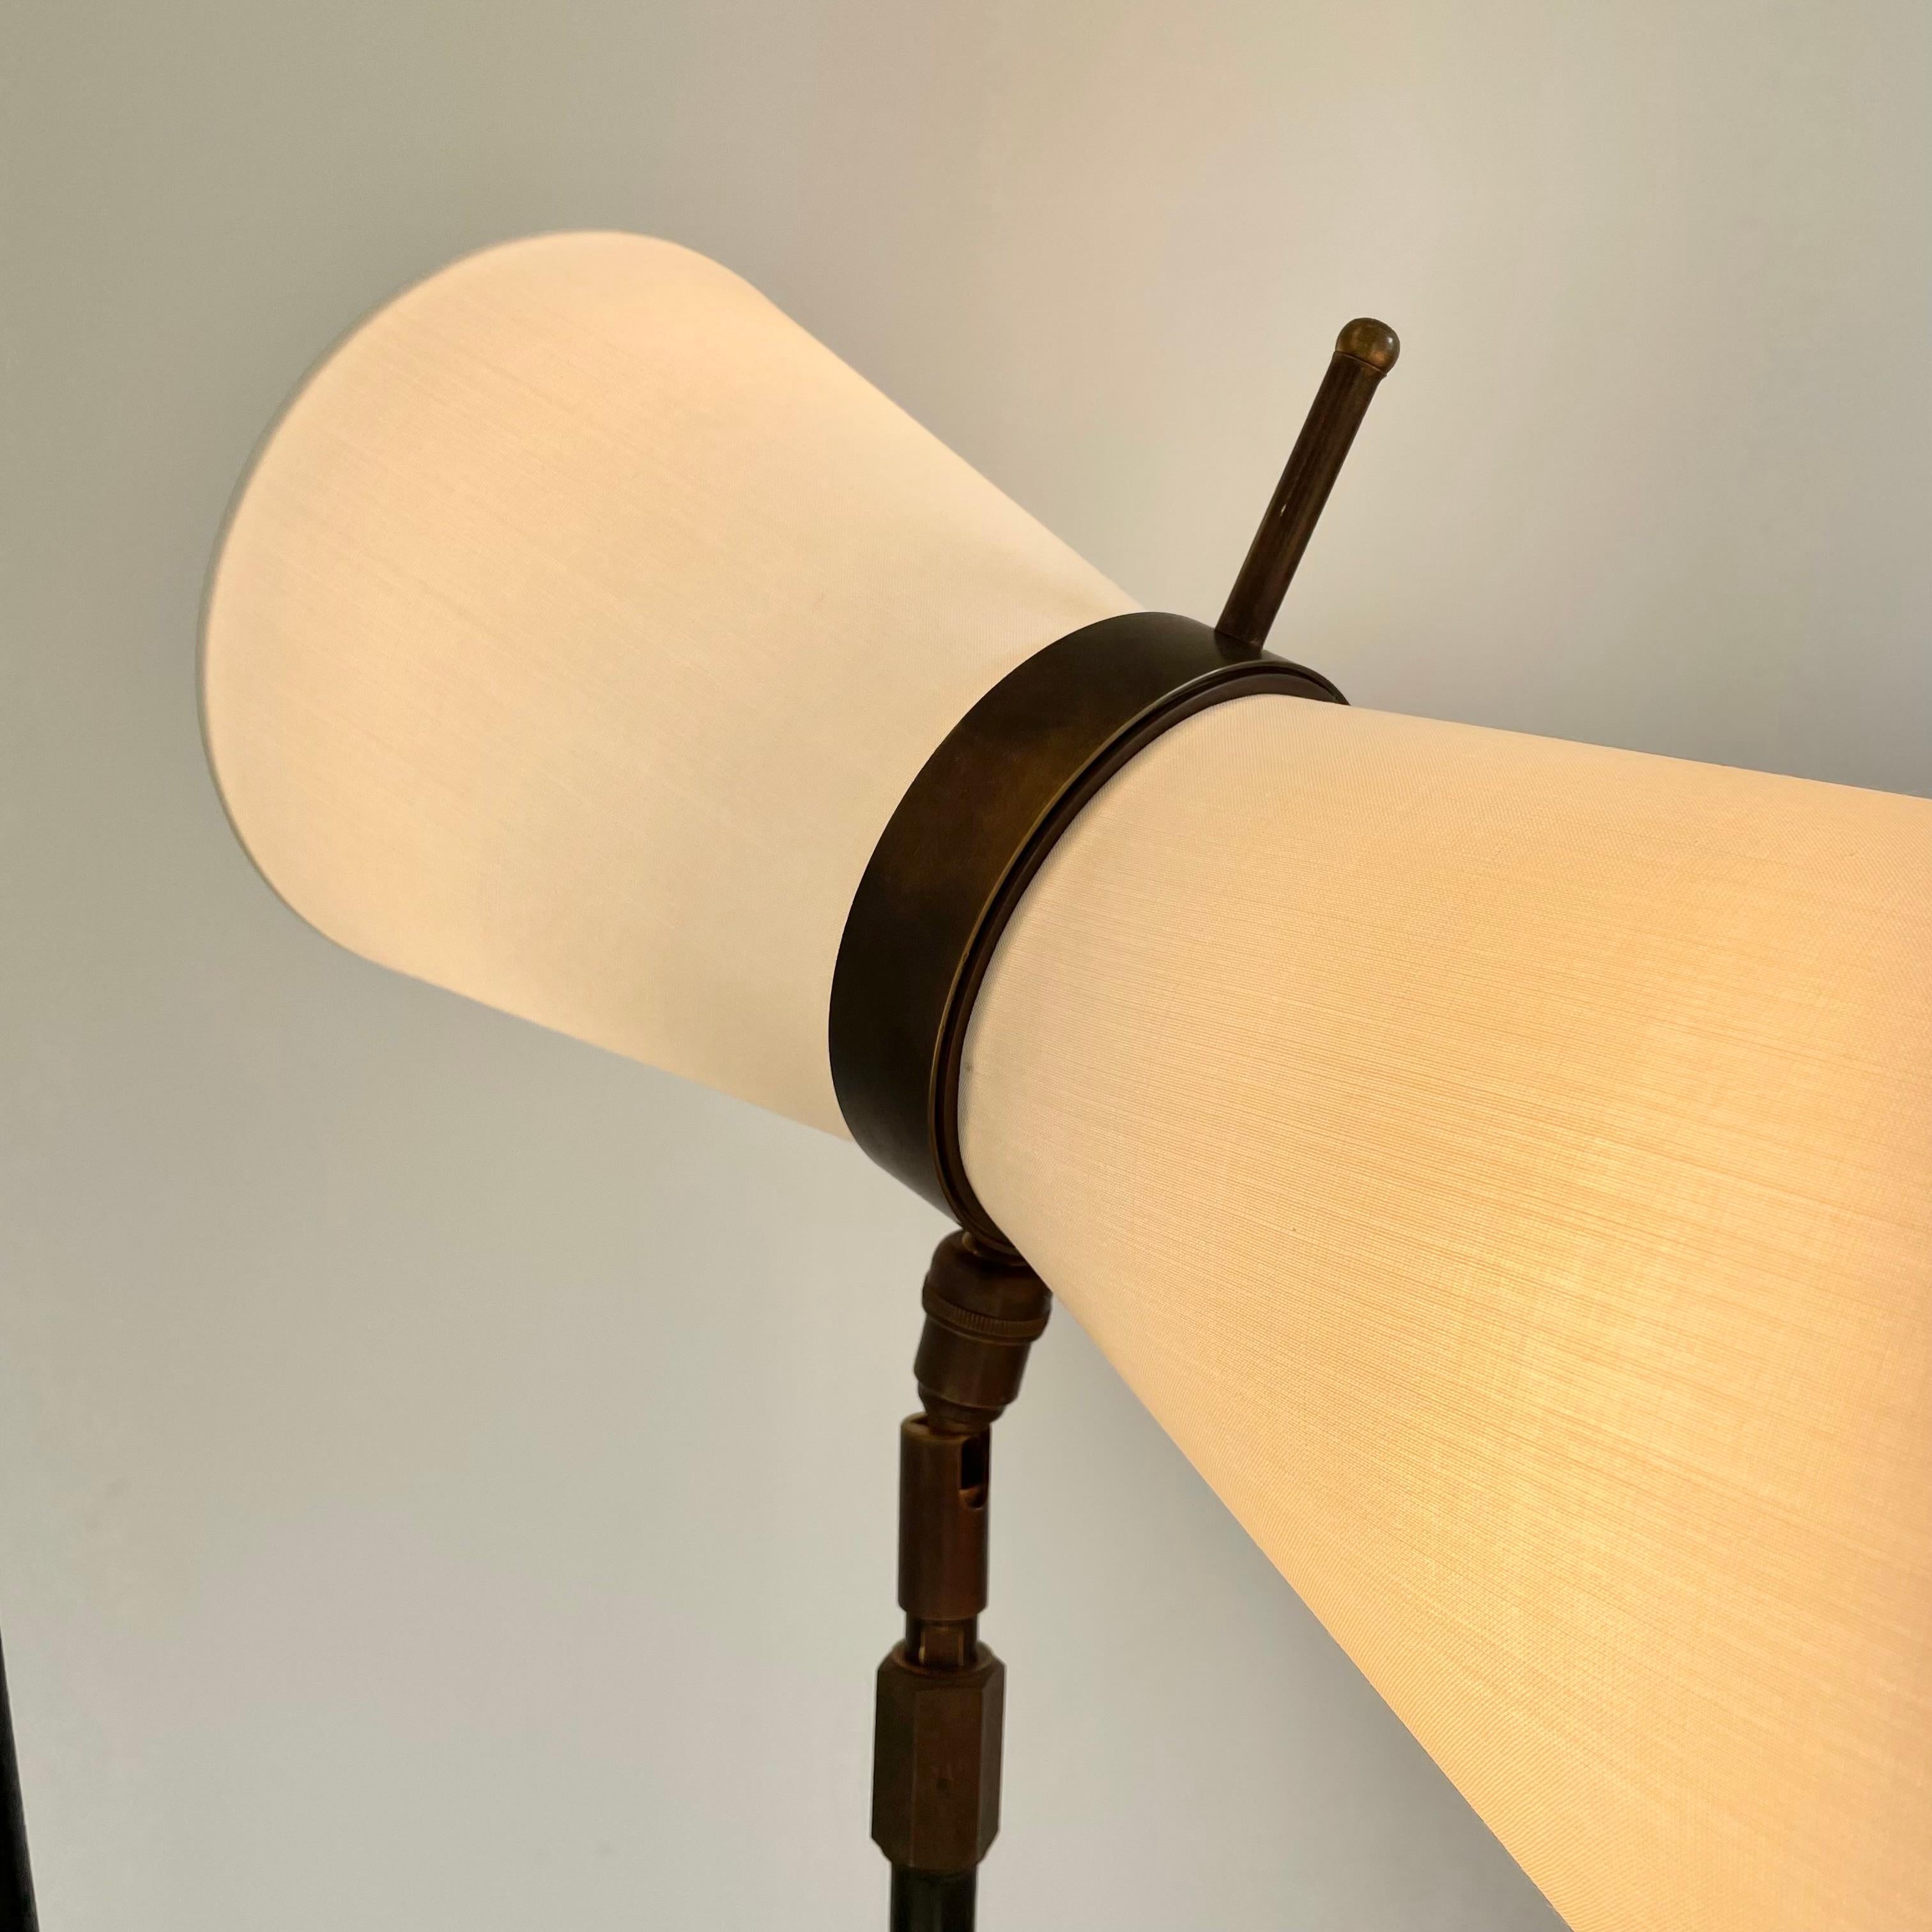 Double Headed Articulating Floor Lamp, 1950s France For Sale 6